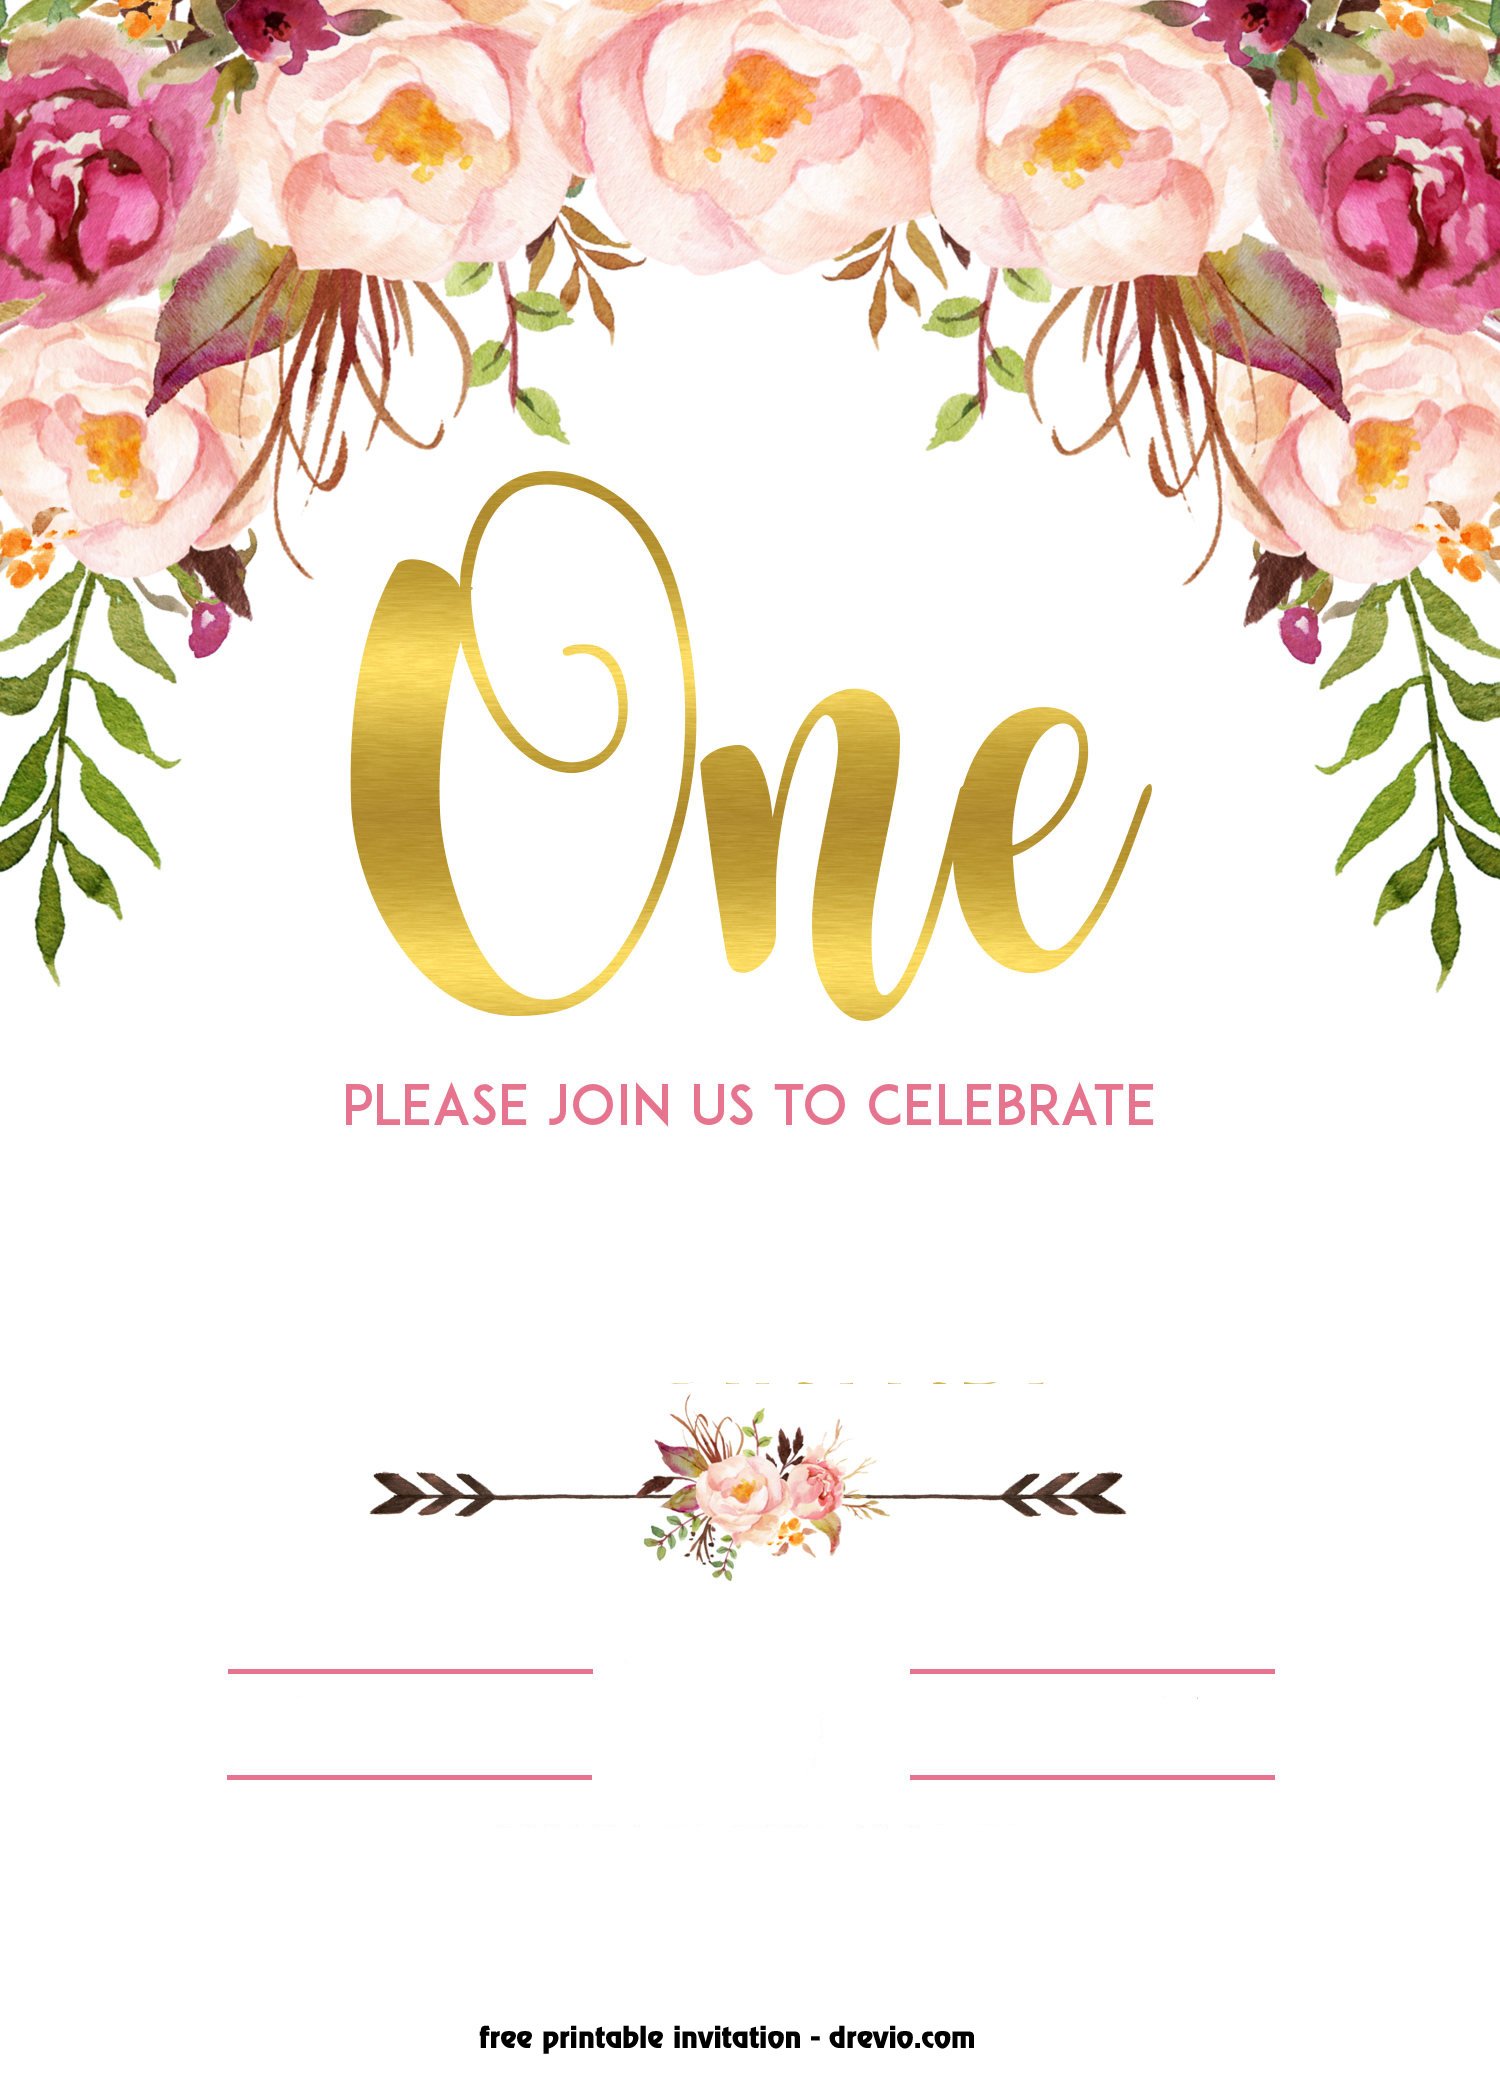 free-printable-horse-floral-vintage-invitation-templates-in-2020